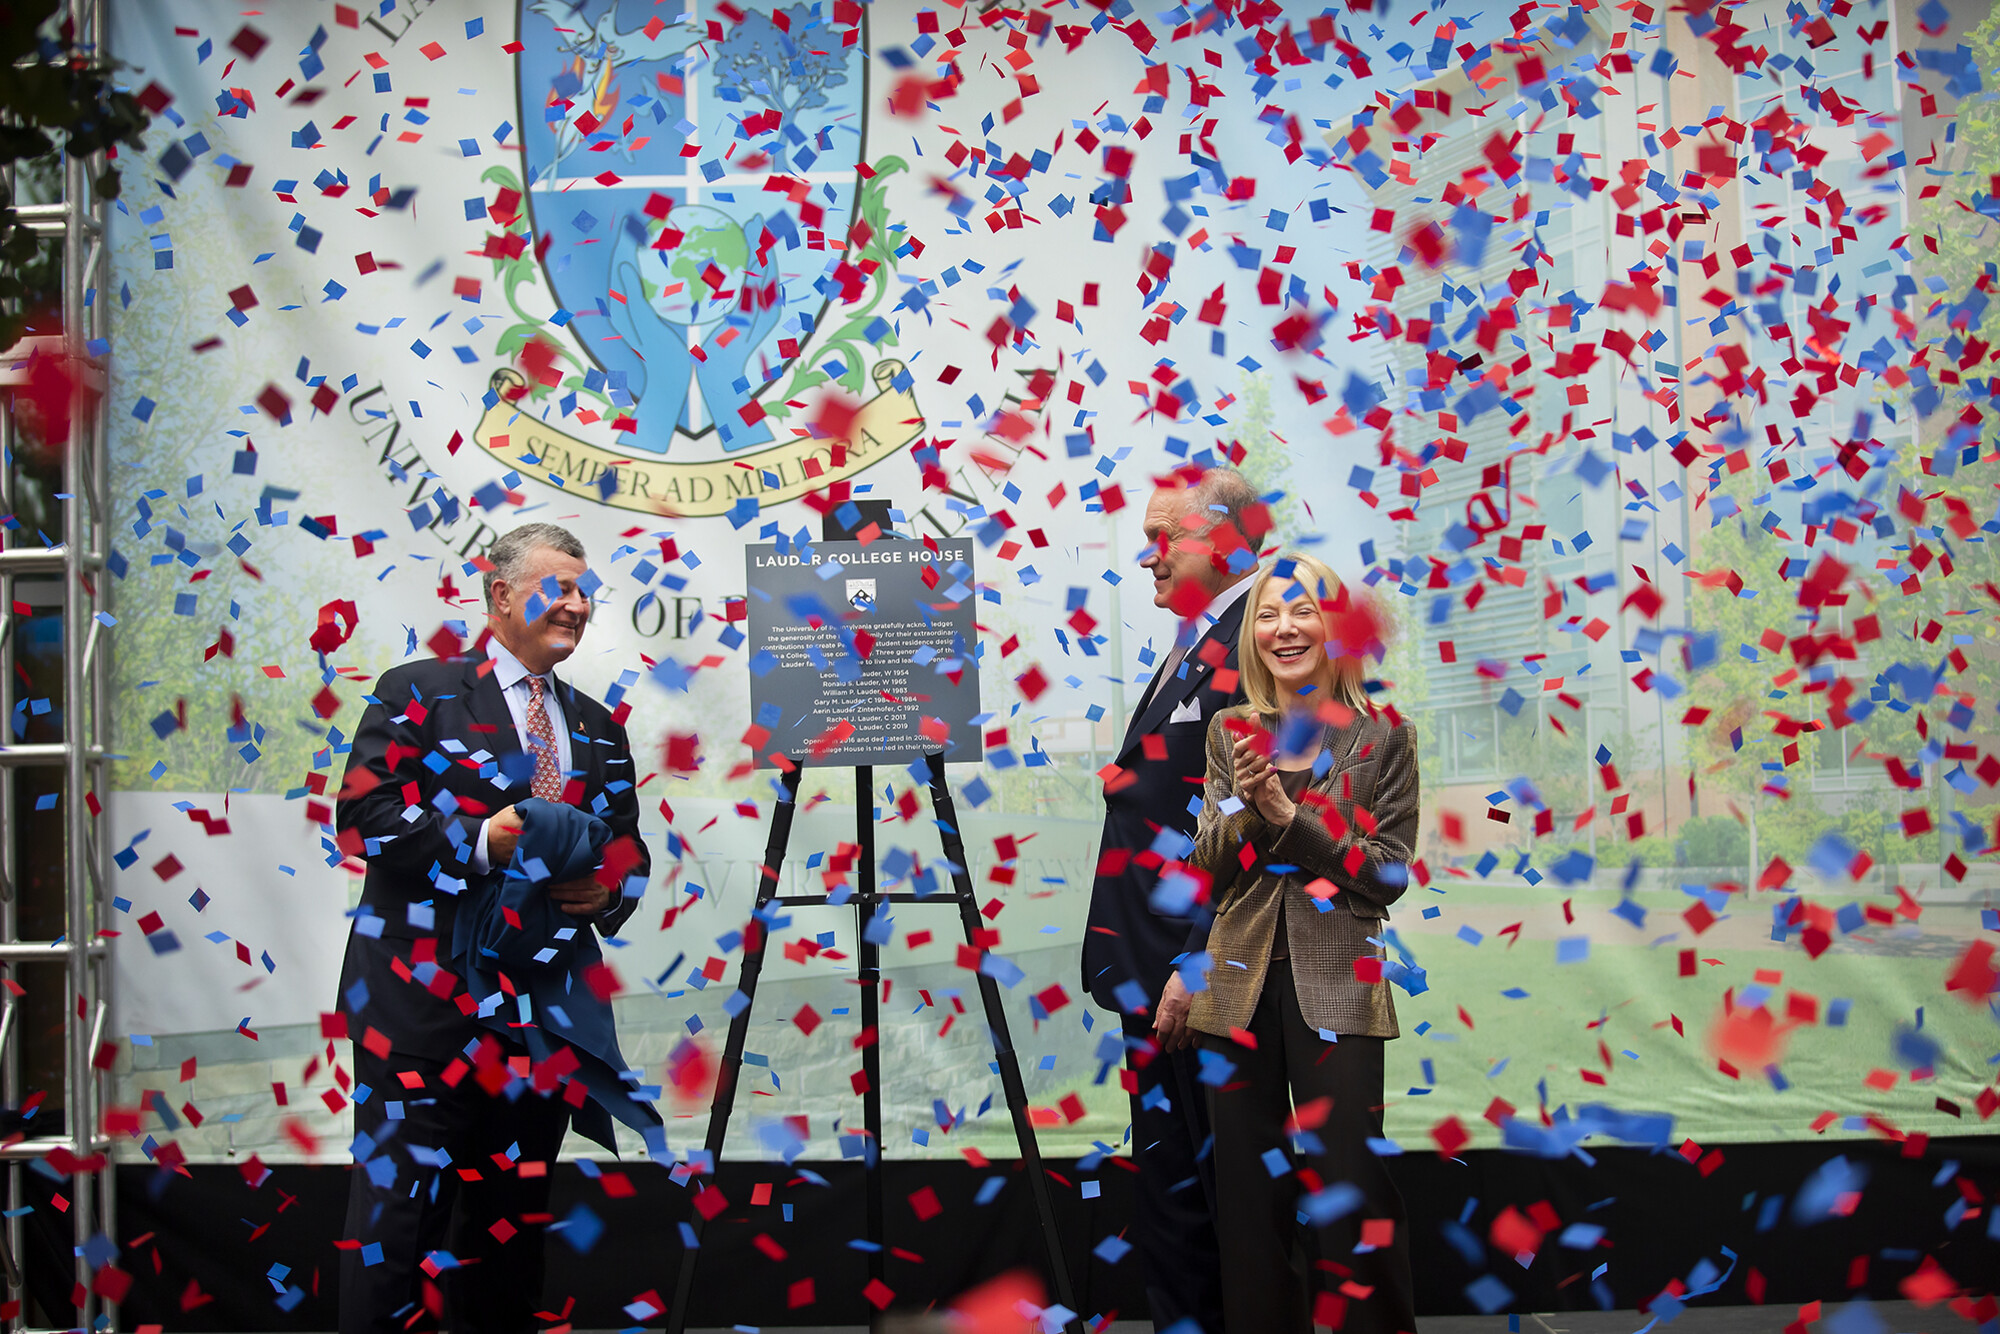 William and Ronald Lauder on stage with Amy Gutmann as confetti falls